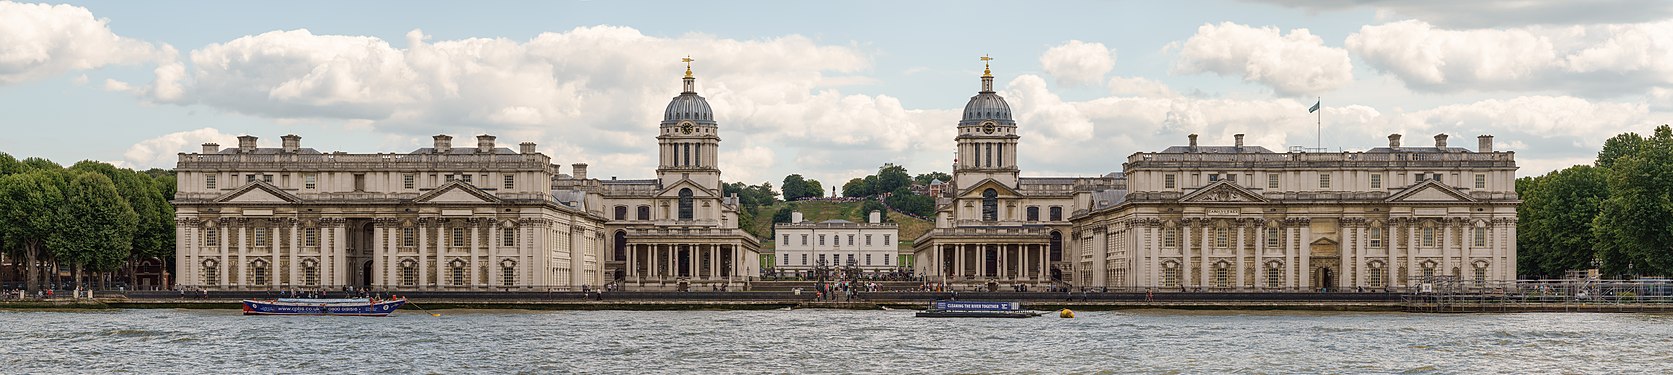 Old Royal Naval College viewed from across the Thames (created by Colin; nominated by Bammesk)